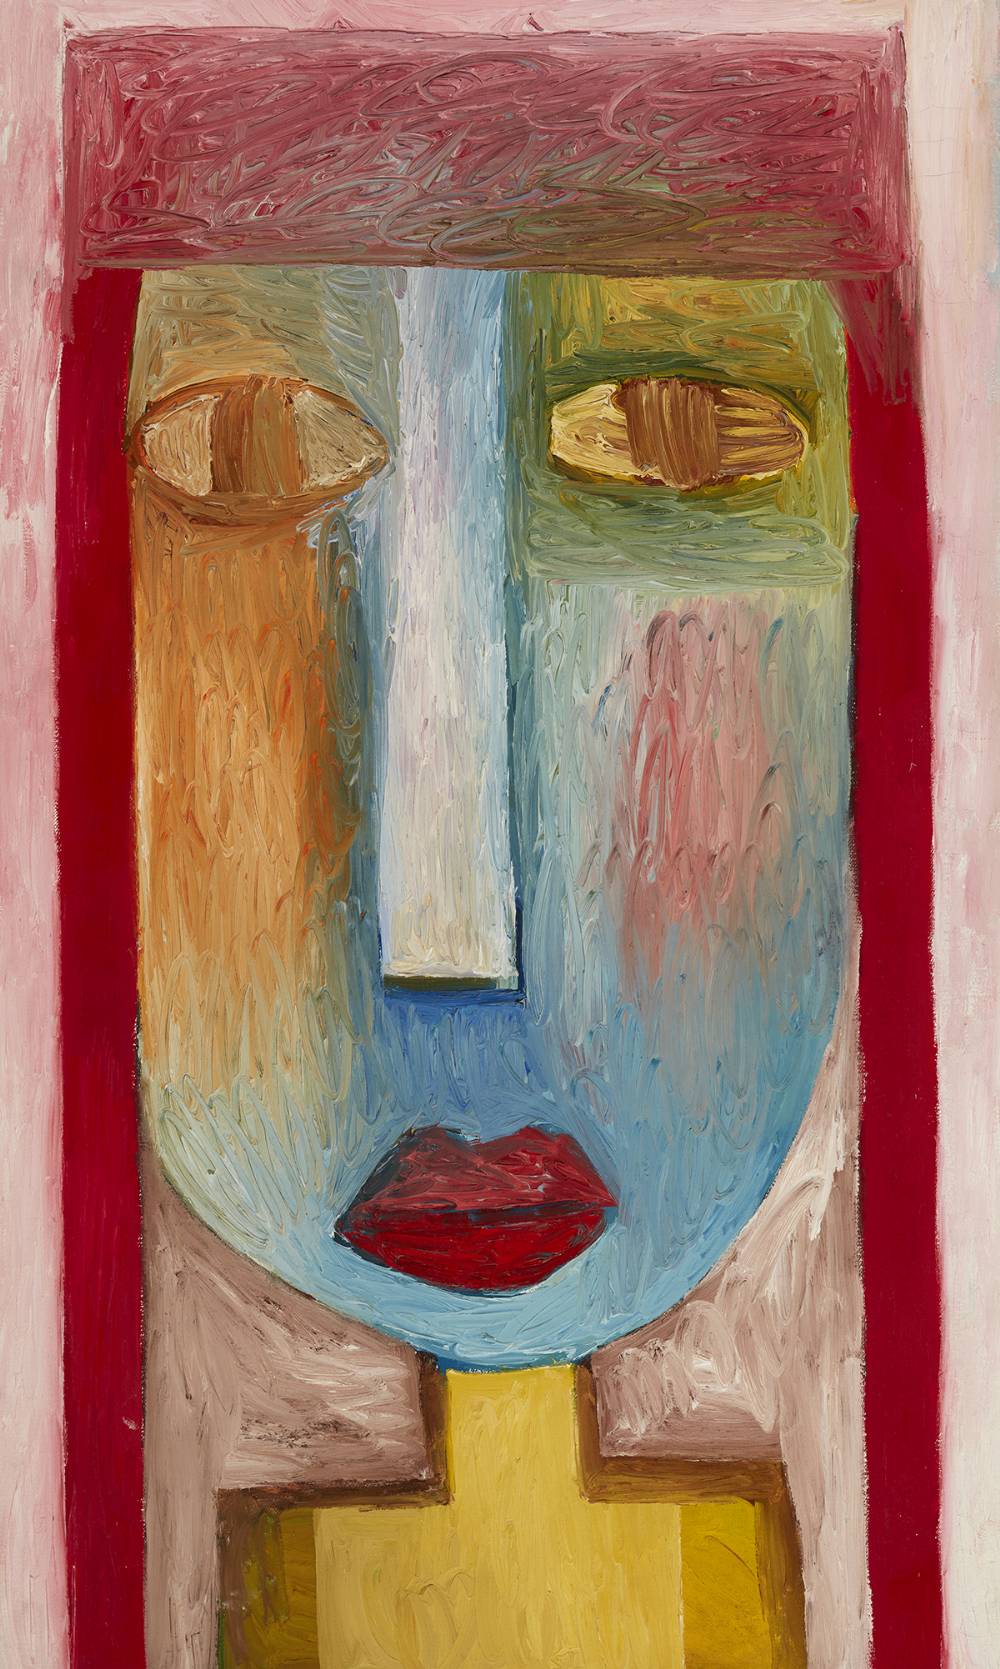 FACE OF A WOMAN by Robert Ryan sold for 380 at Whyte's Auctions